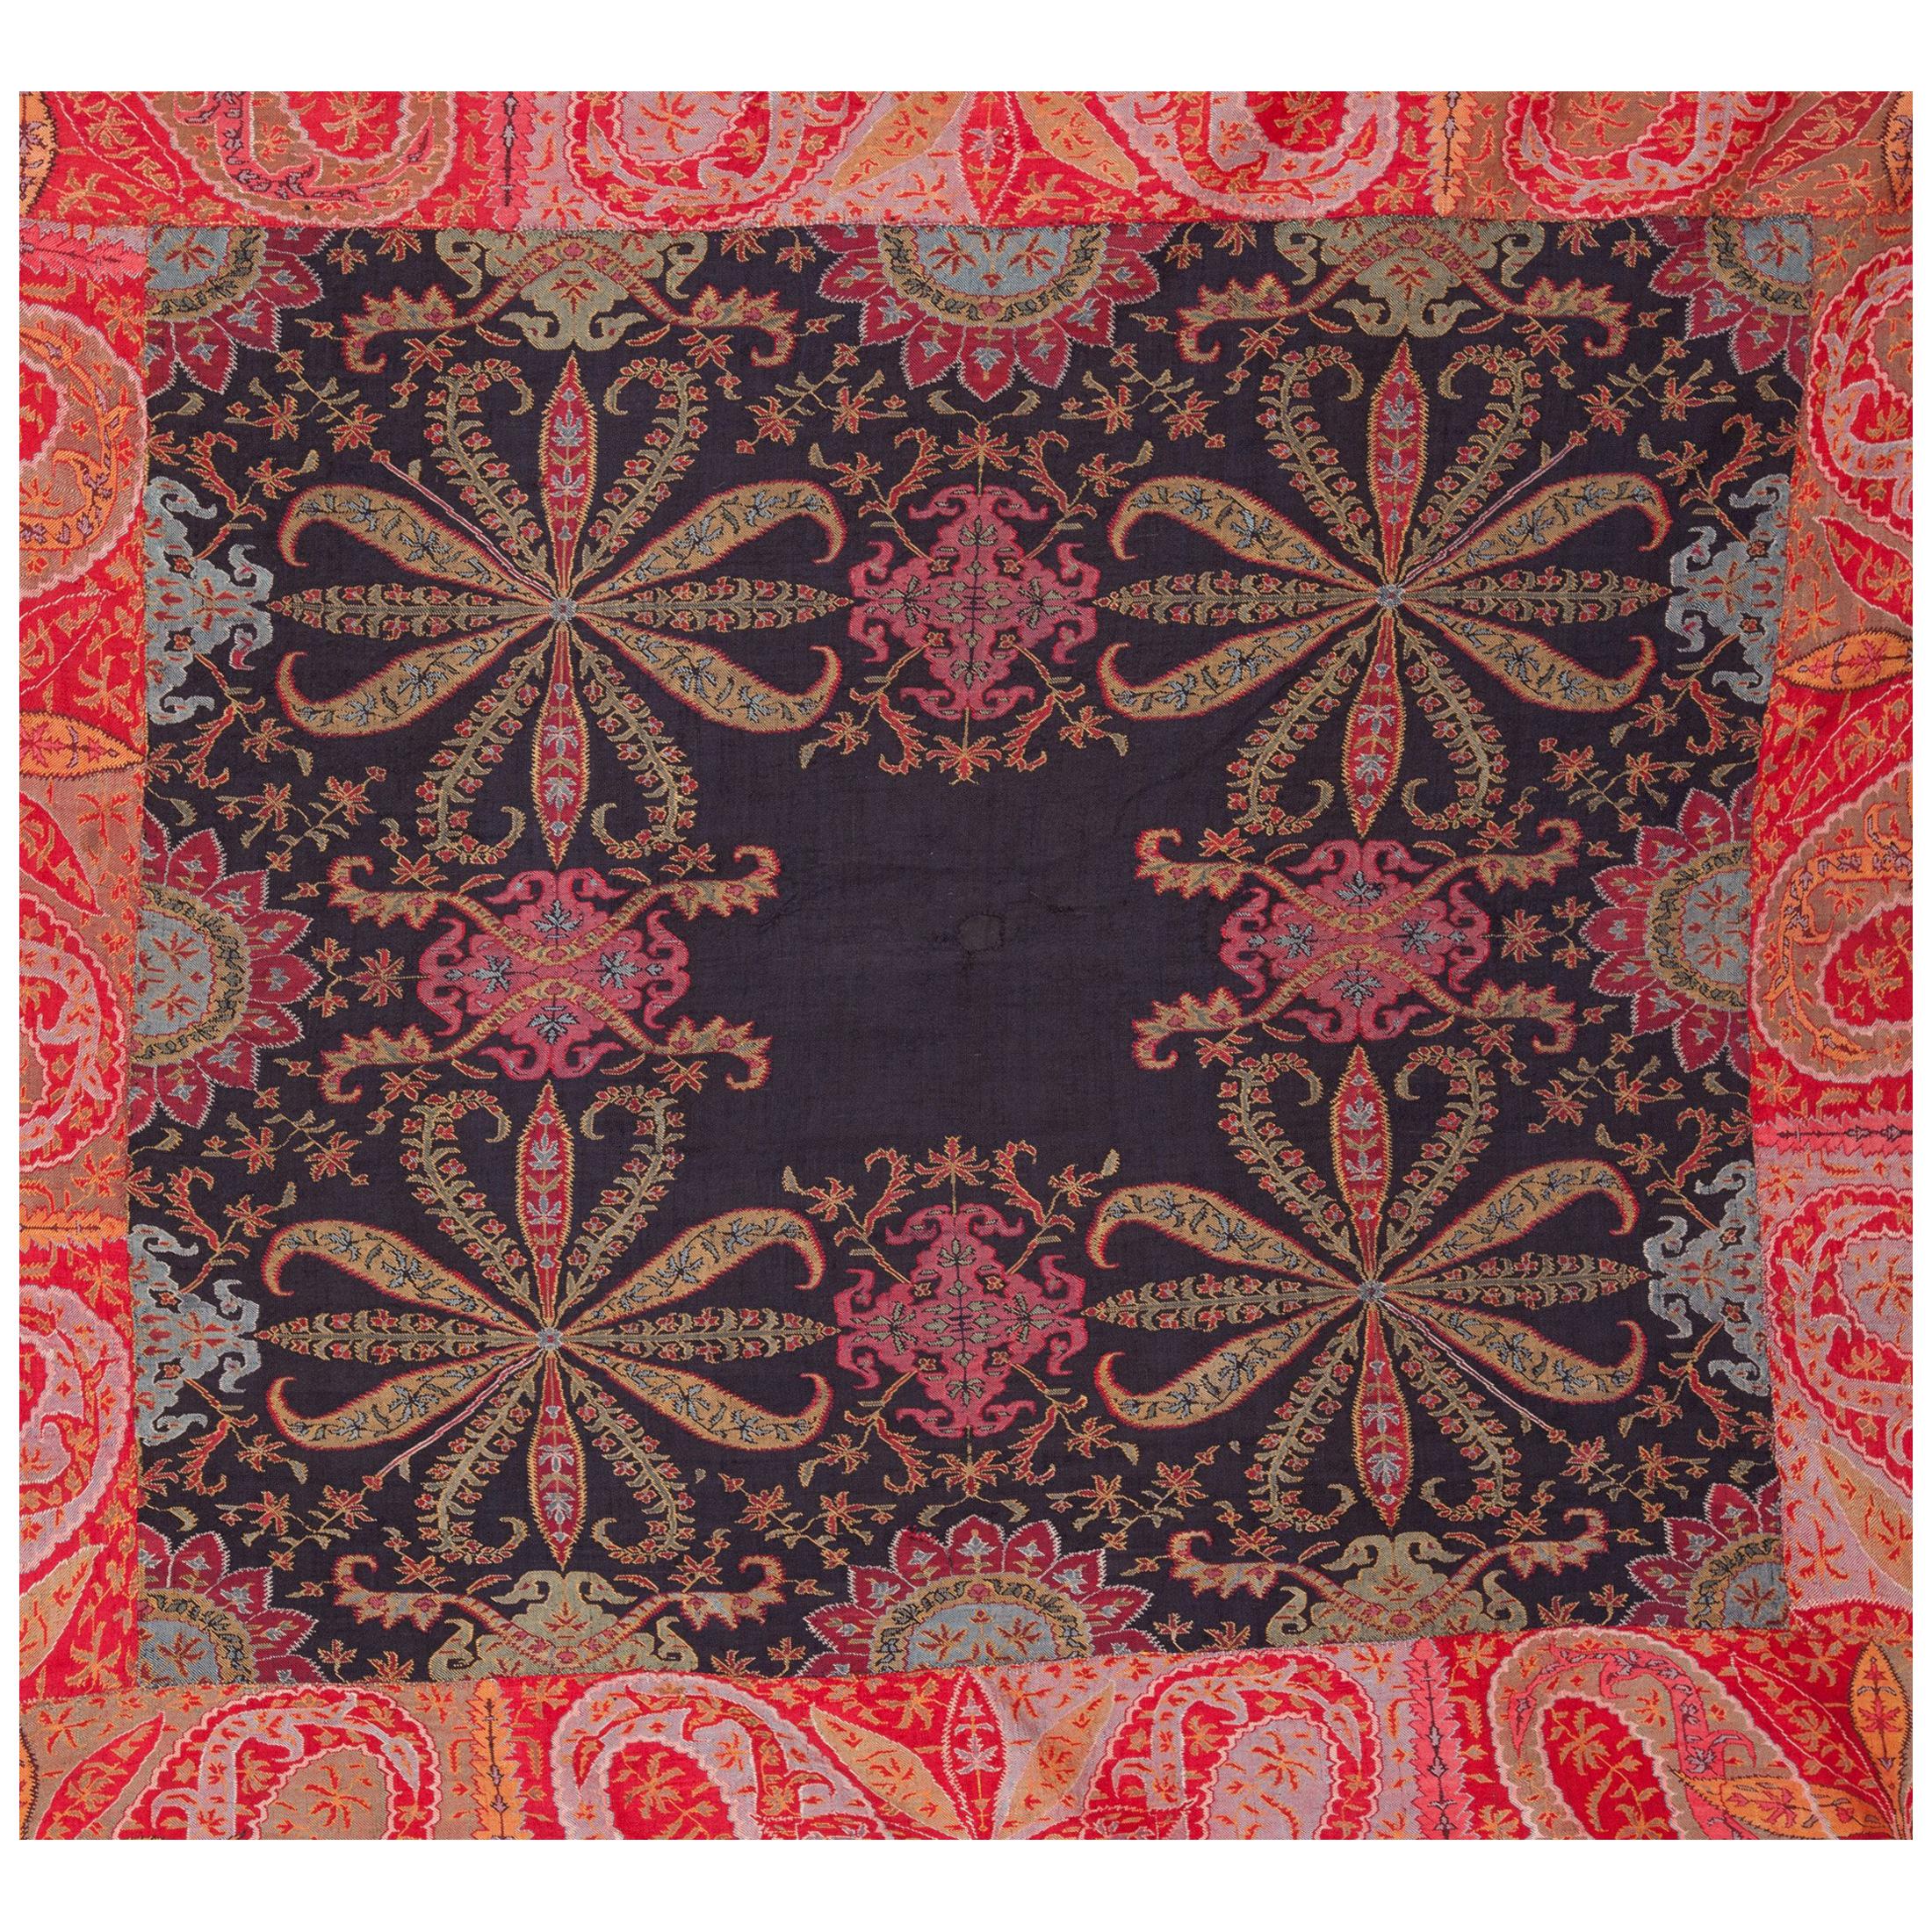 Antique Kashmir Long Shawl from India Early 19th Century, 1830s